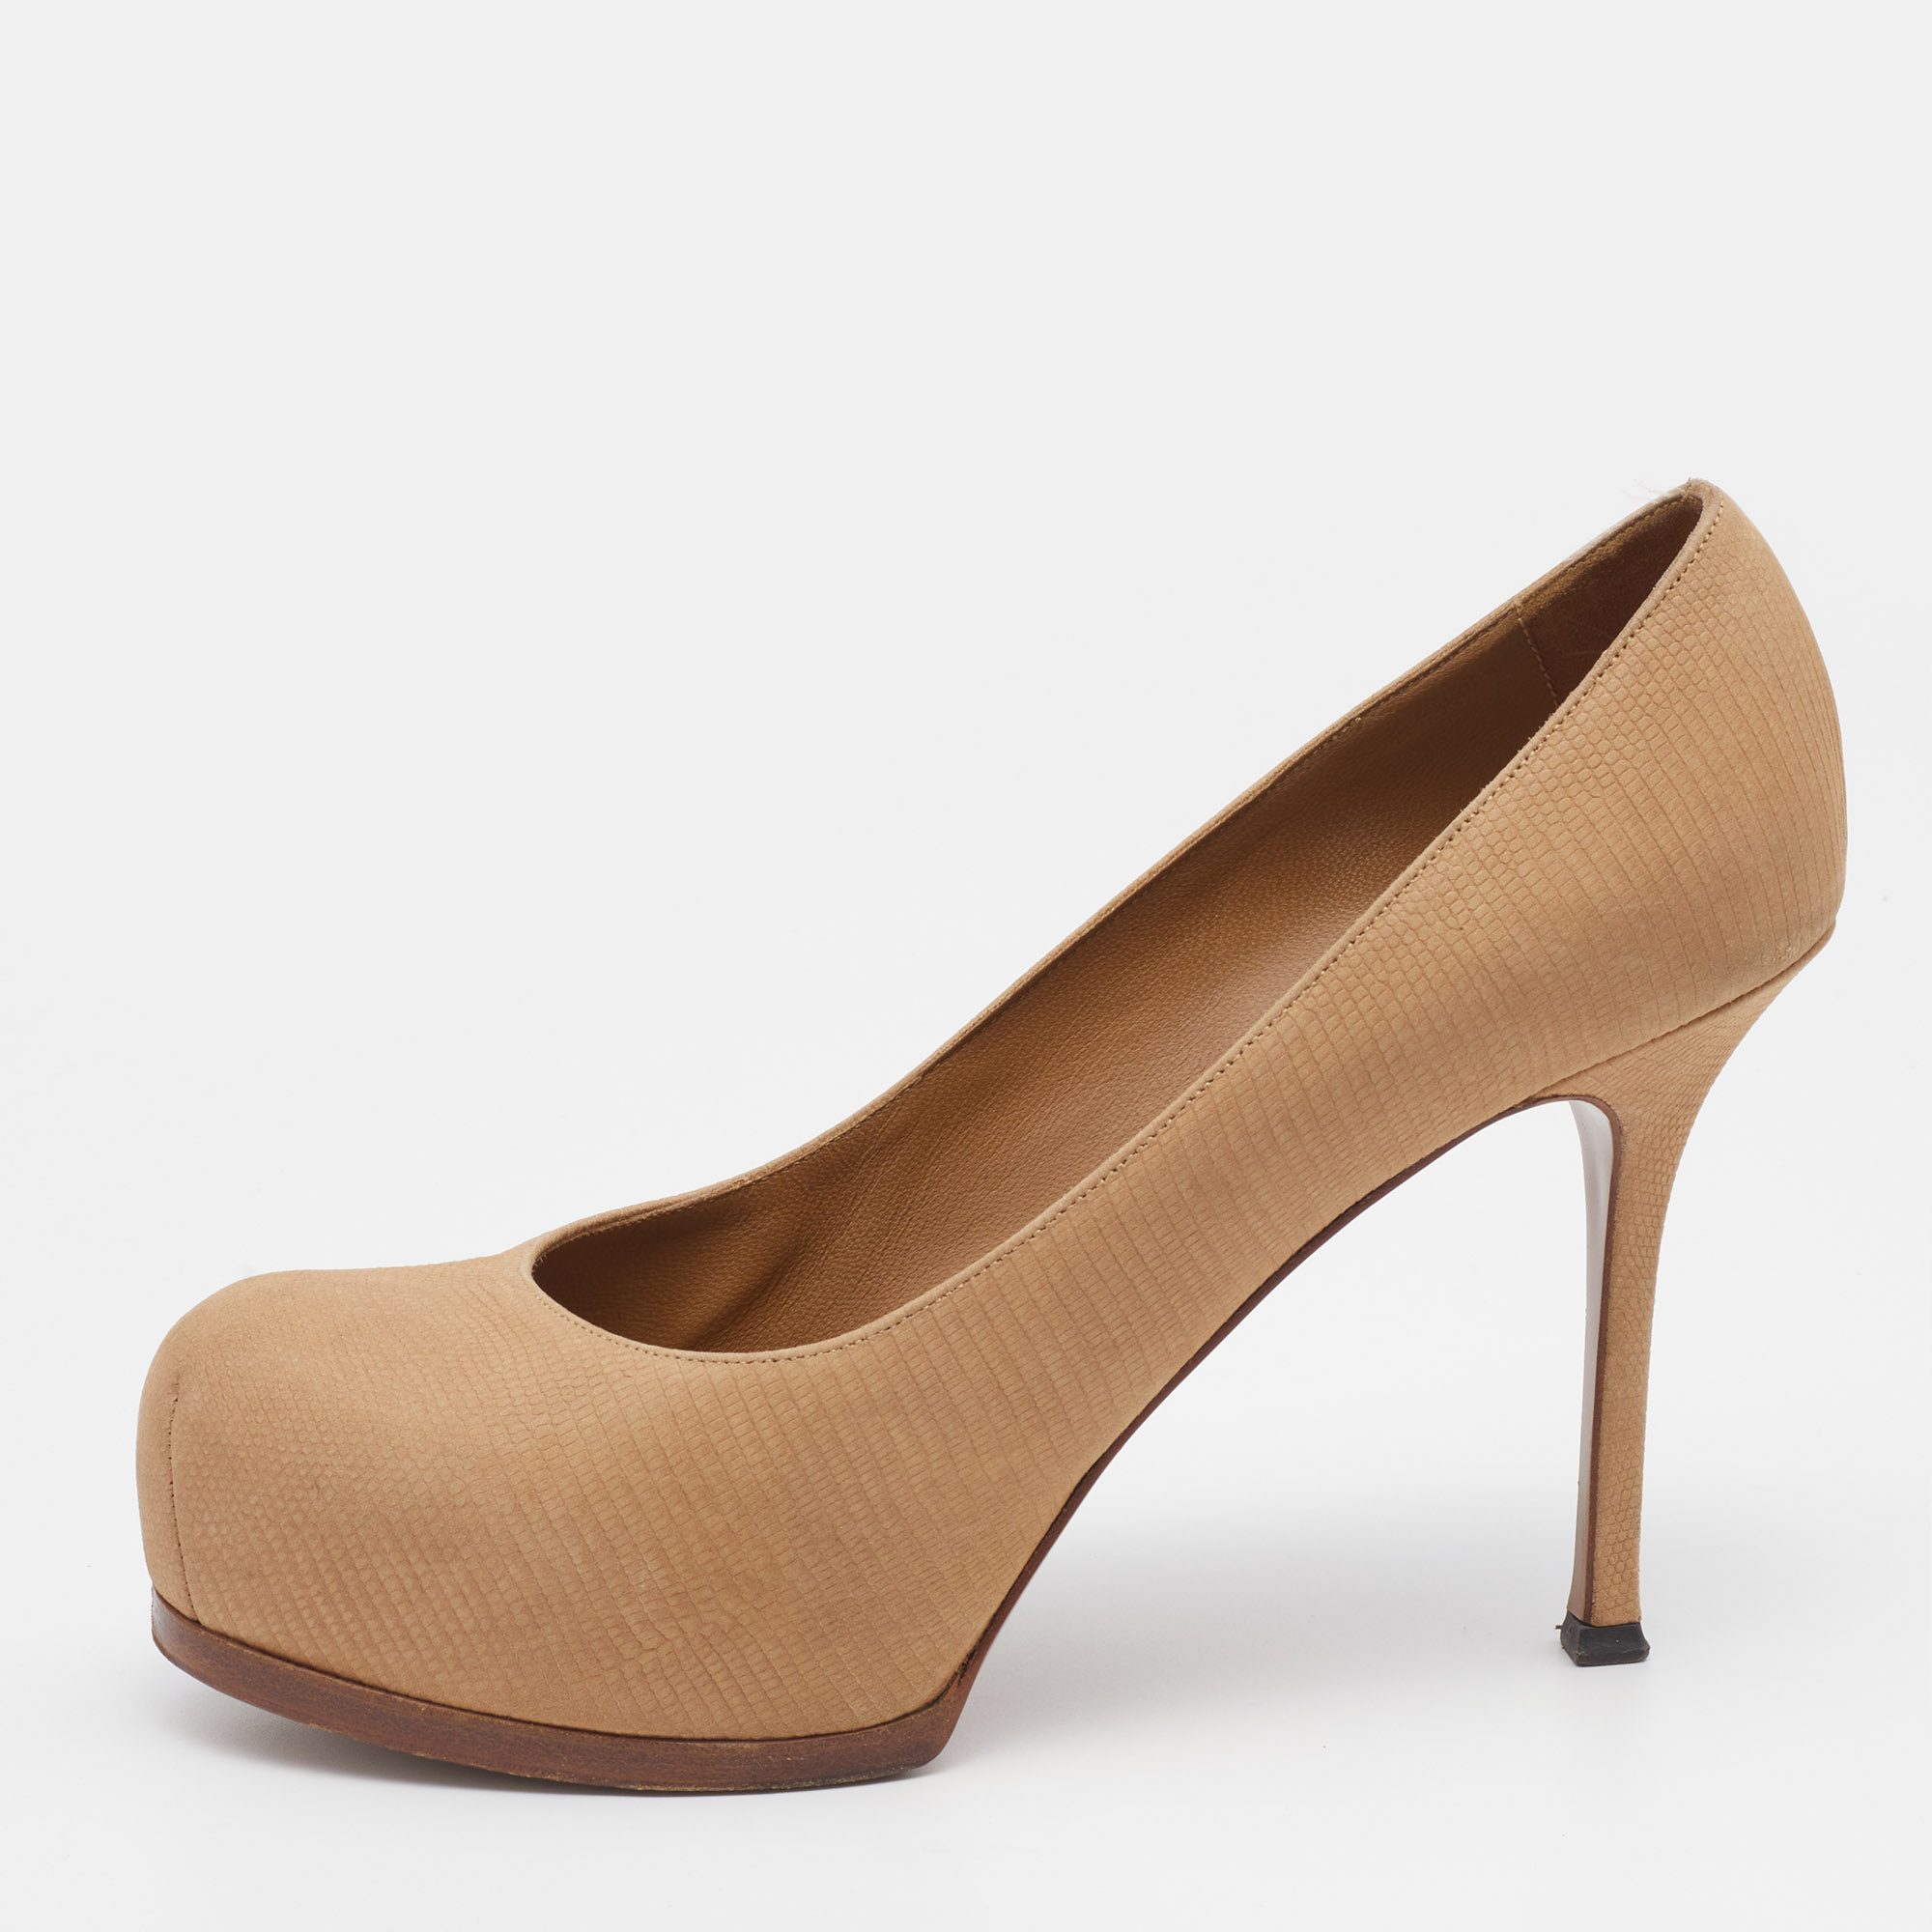 Cut into a timeless silhouette this pair of Tribtoo pumps from Yves Saint Laurent is simple yet classy. Created from leather it flaunts platforms 11cm heels and comfortable footbeds.